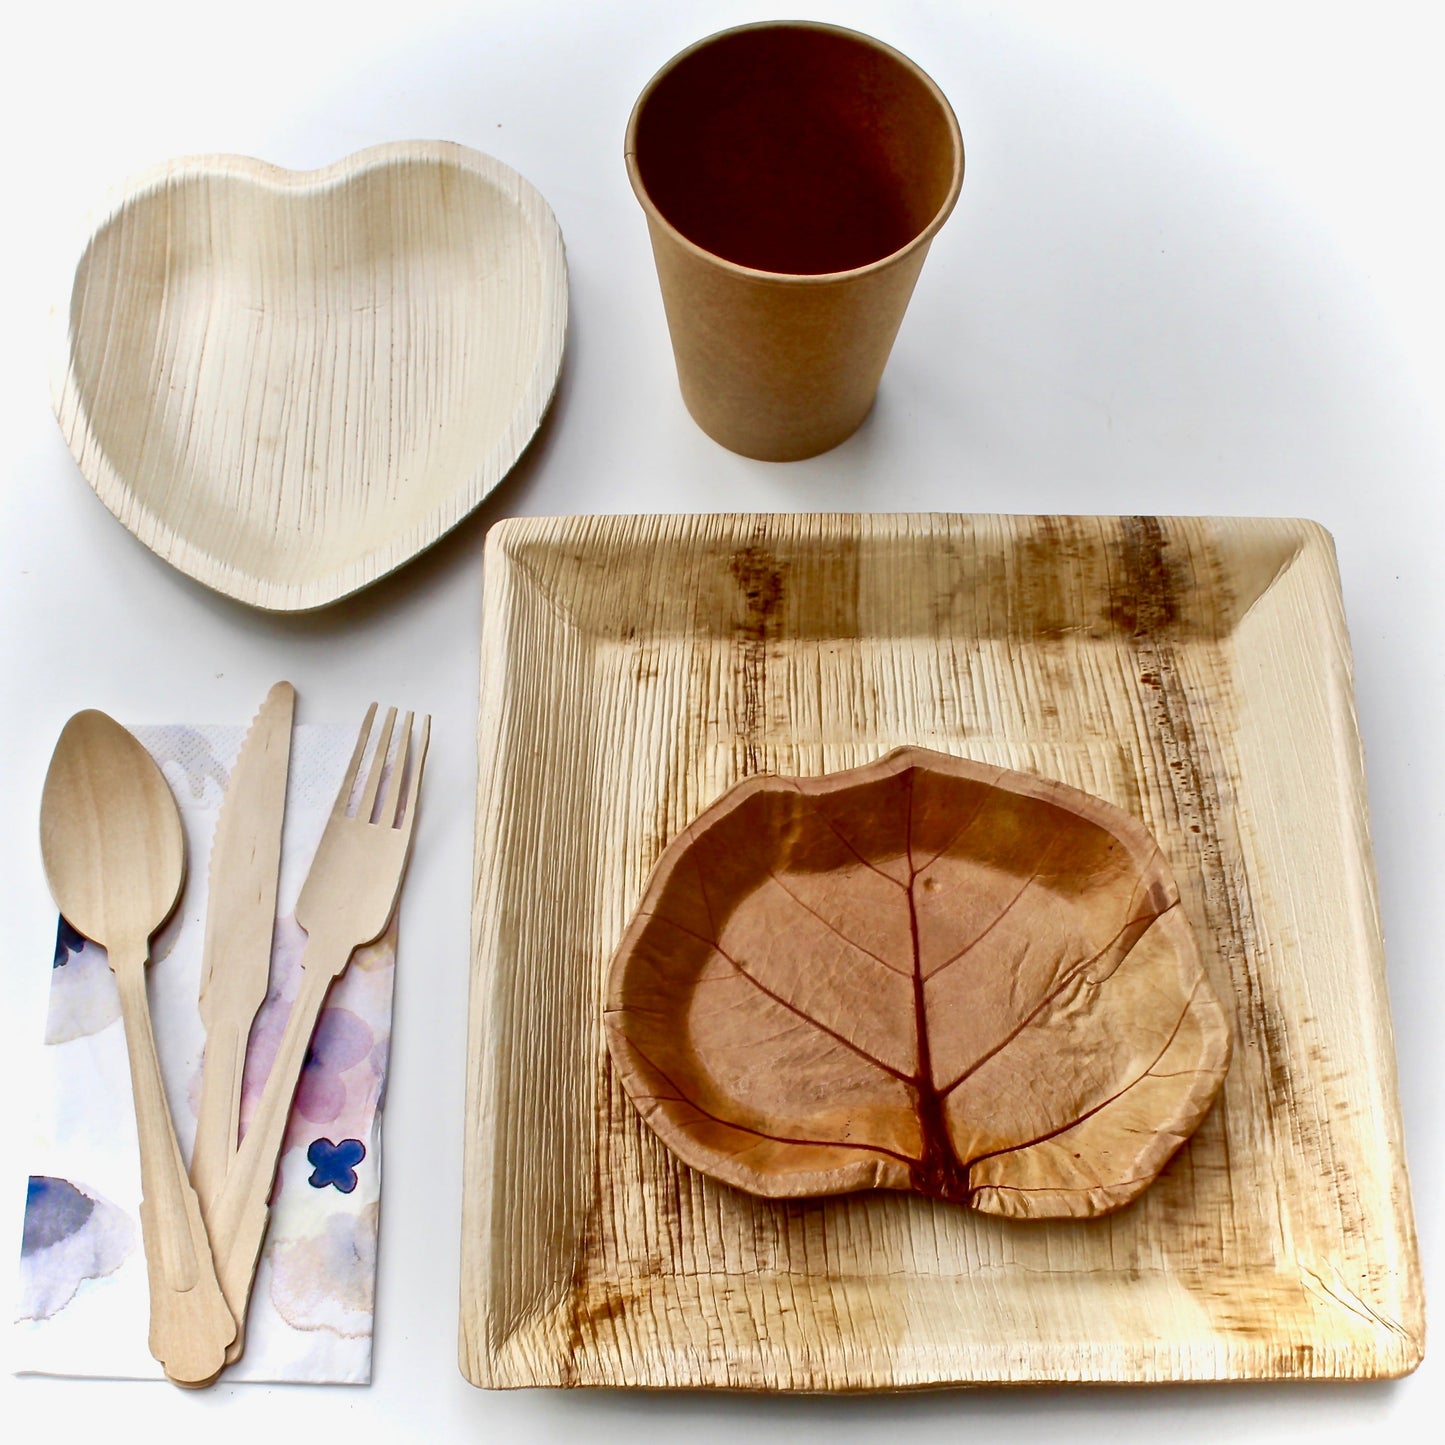 bamboo Type palm Leaf Plate 20 Pic Deep Square 10" - 20 Pic Sea Grape Dessert Plate 7" - 60 Pic Utensils Wood Birch and 40 pic Napkin